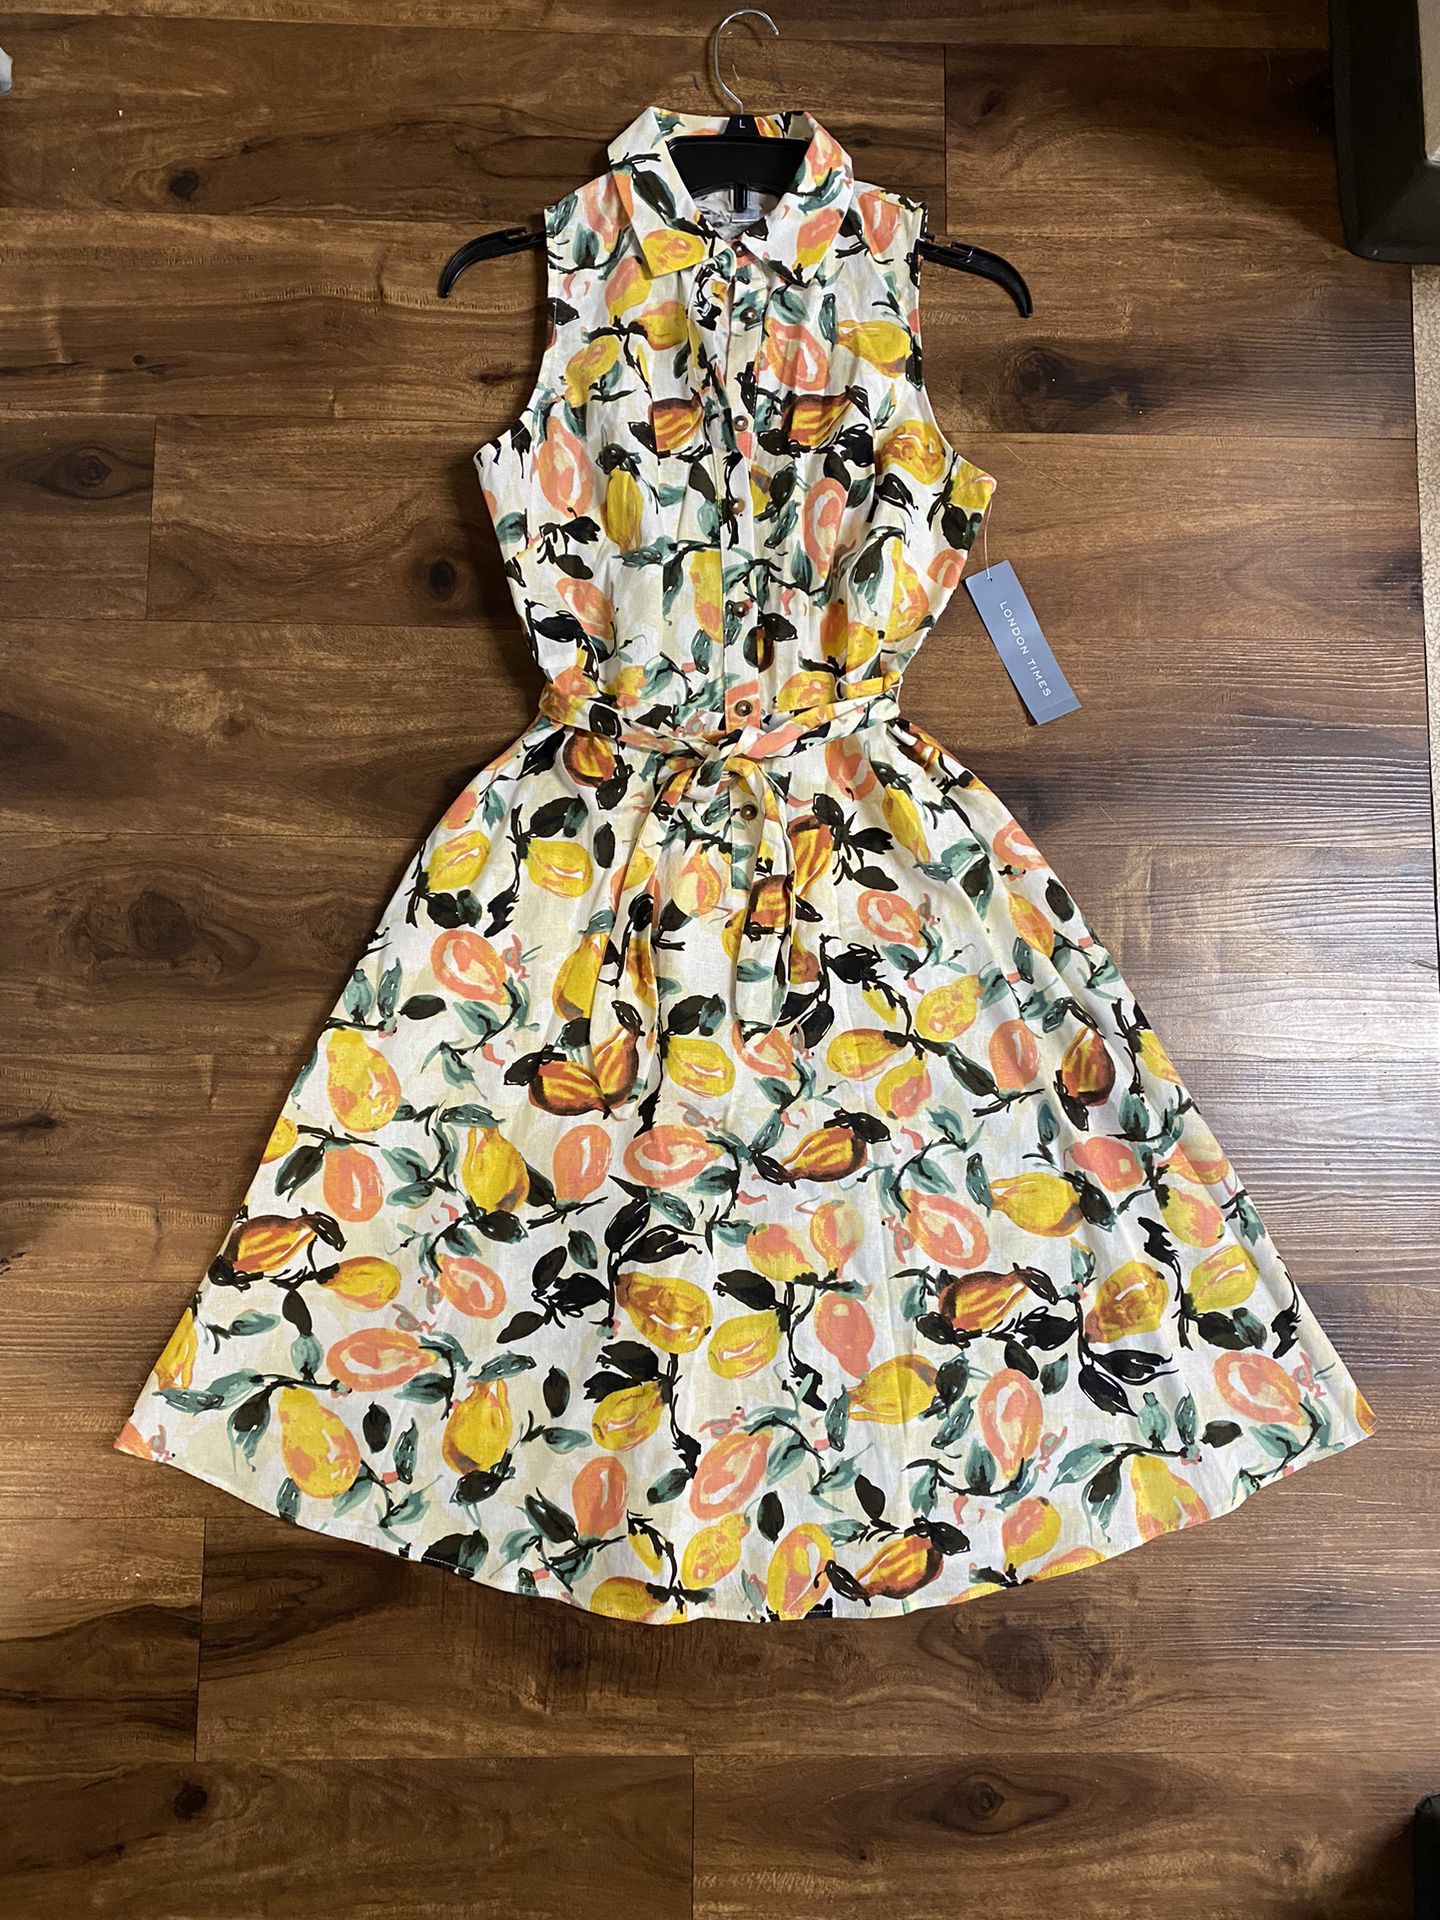 Brand New Woman’s London Times brand yellow Floral Dress Up For Sale 